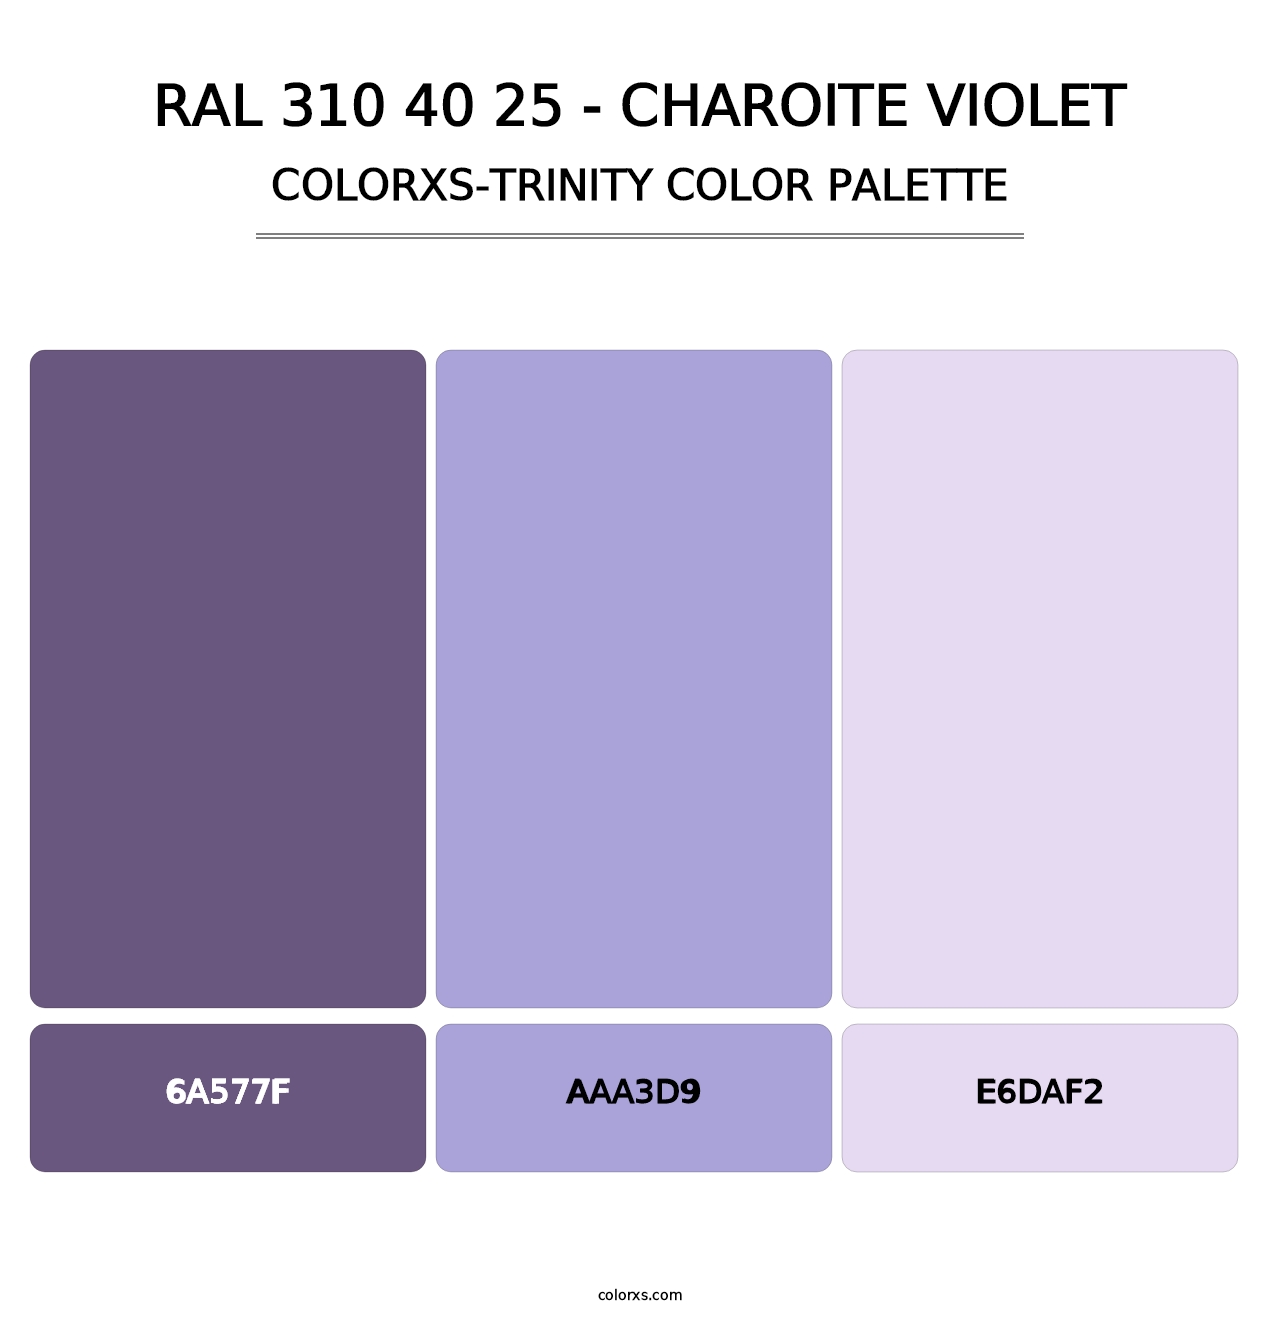 RAL 310 40 25 - Charoite Violet - Colorxs Trinity Palette